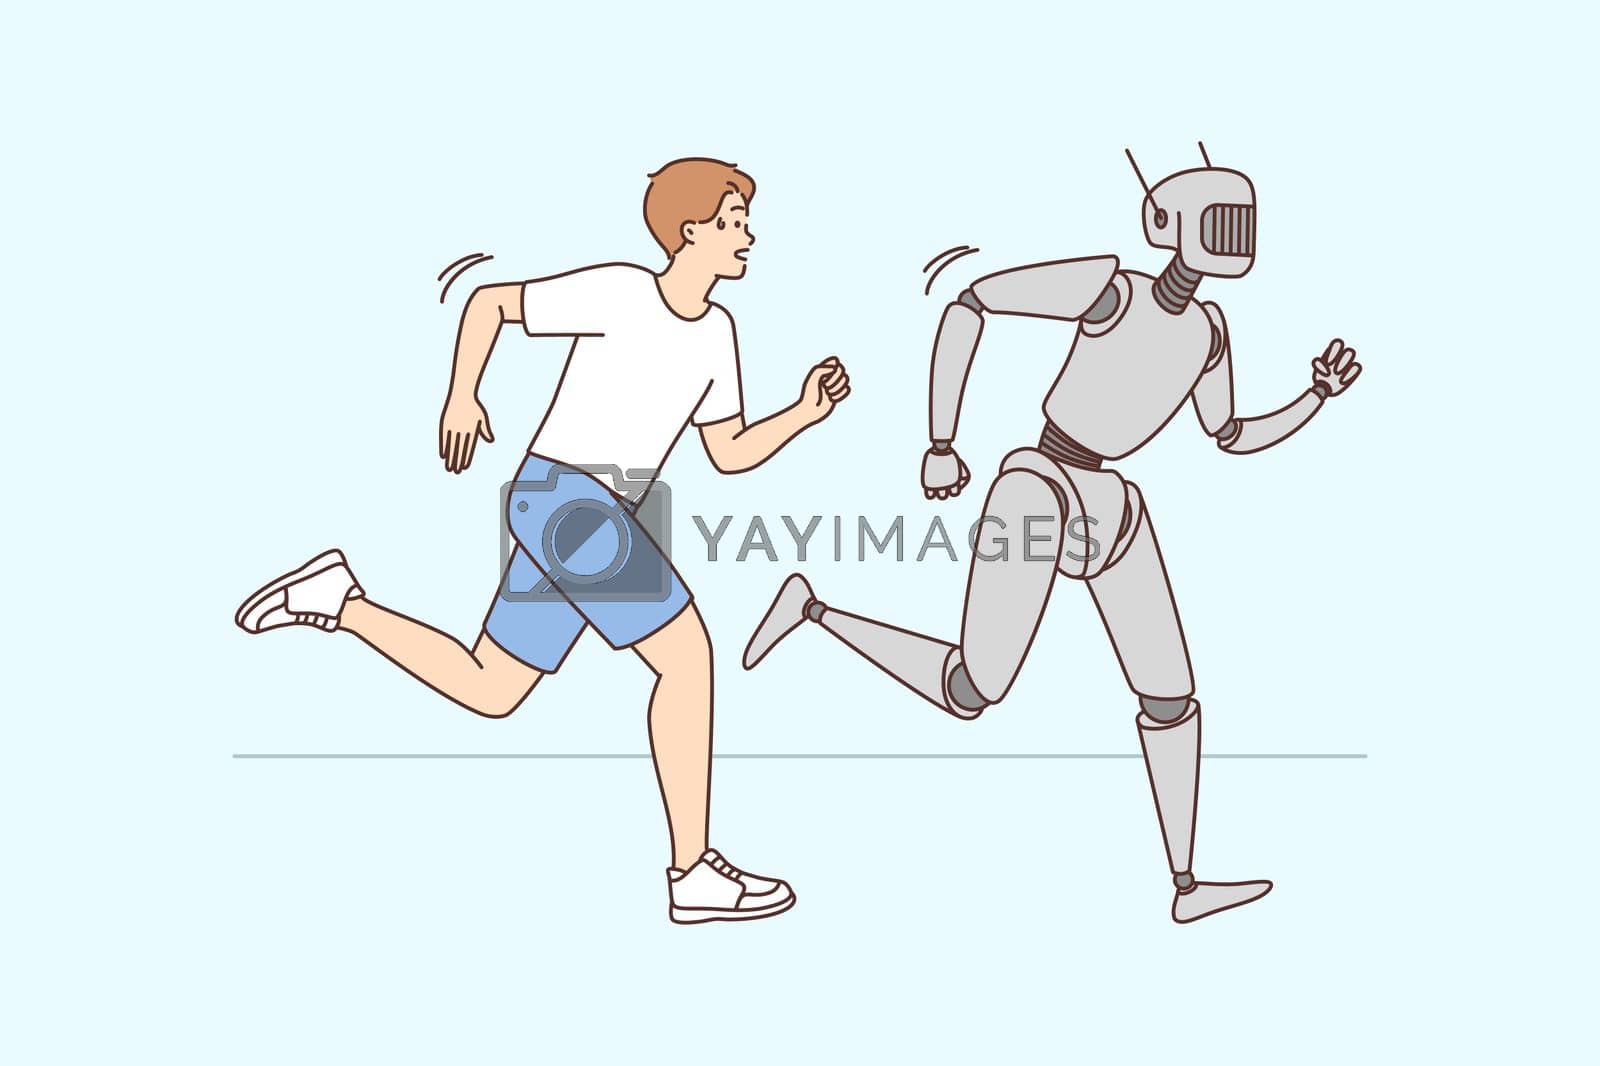 Royalty free image of Robot and human run competition by Vasilyeu